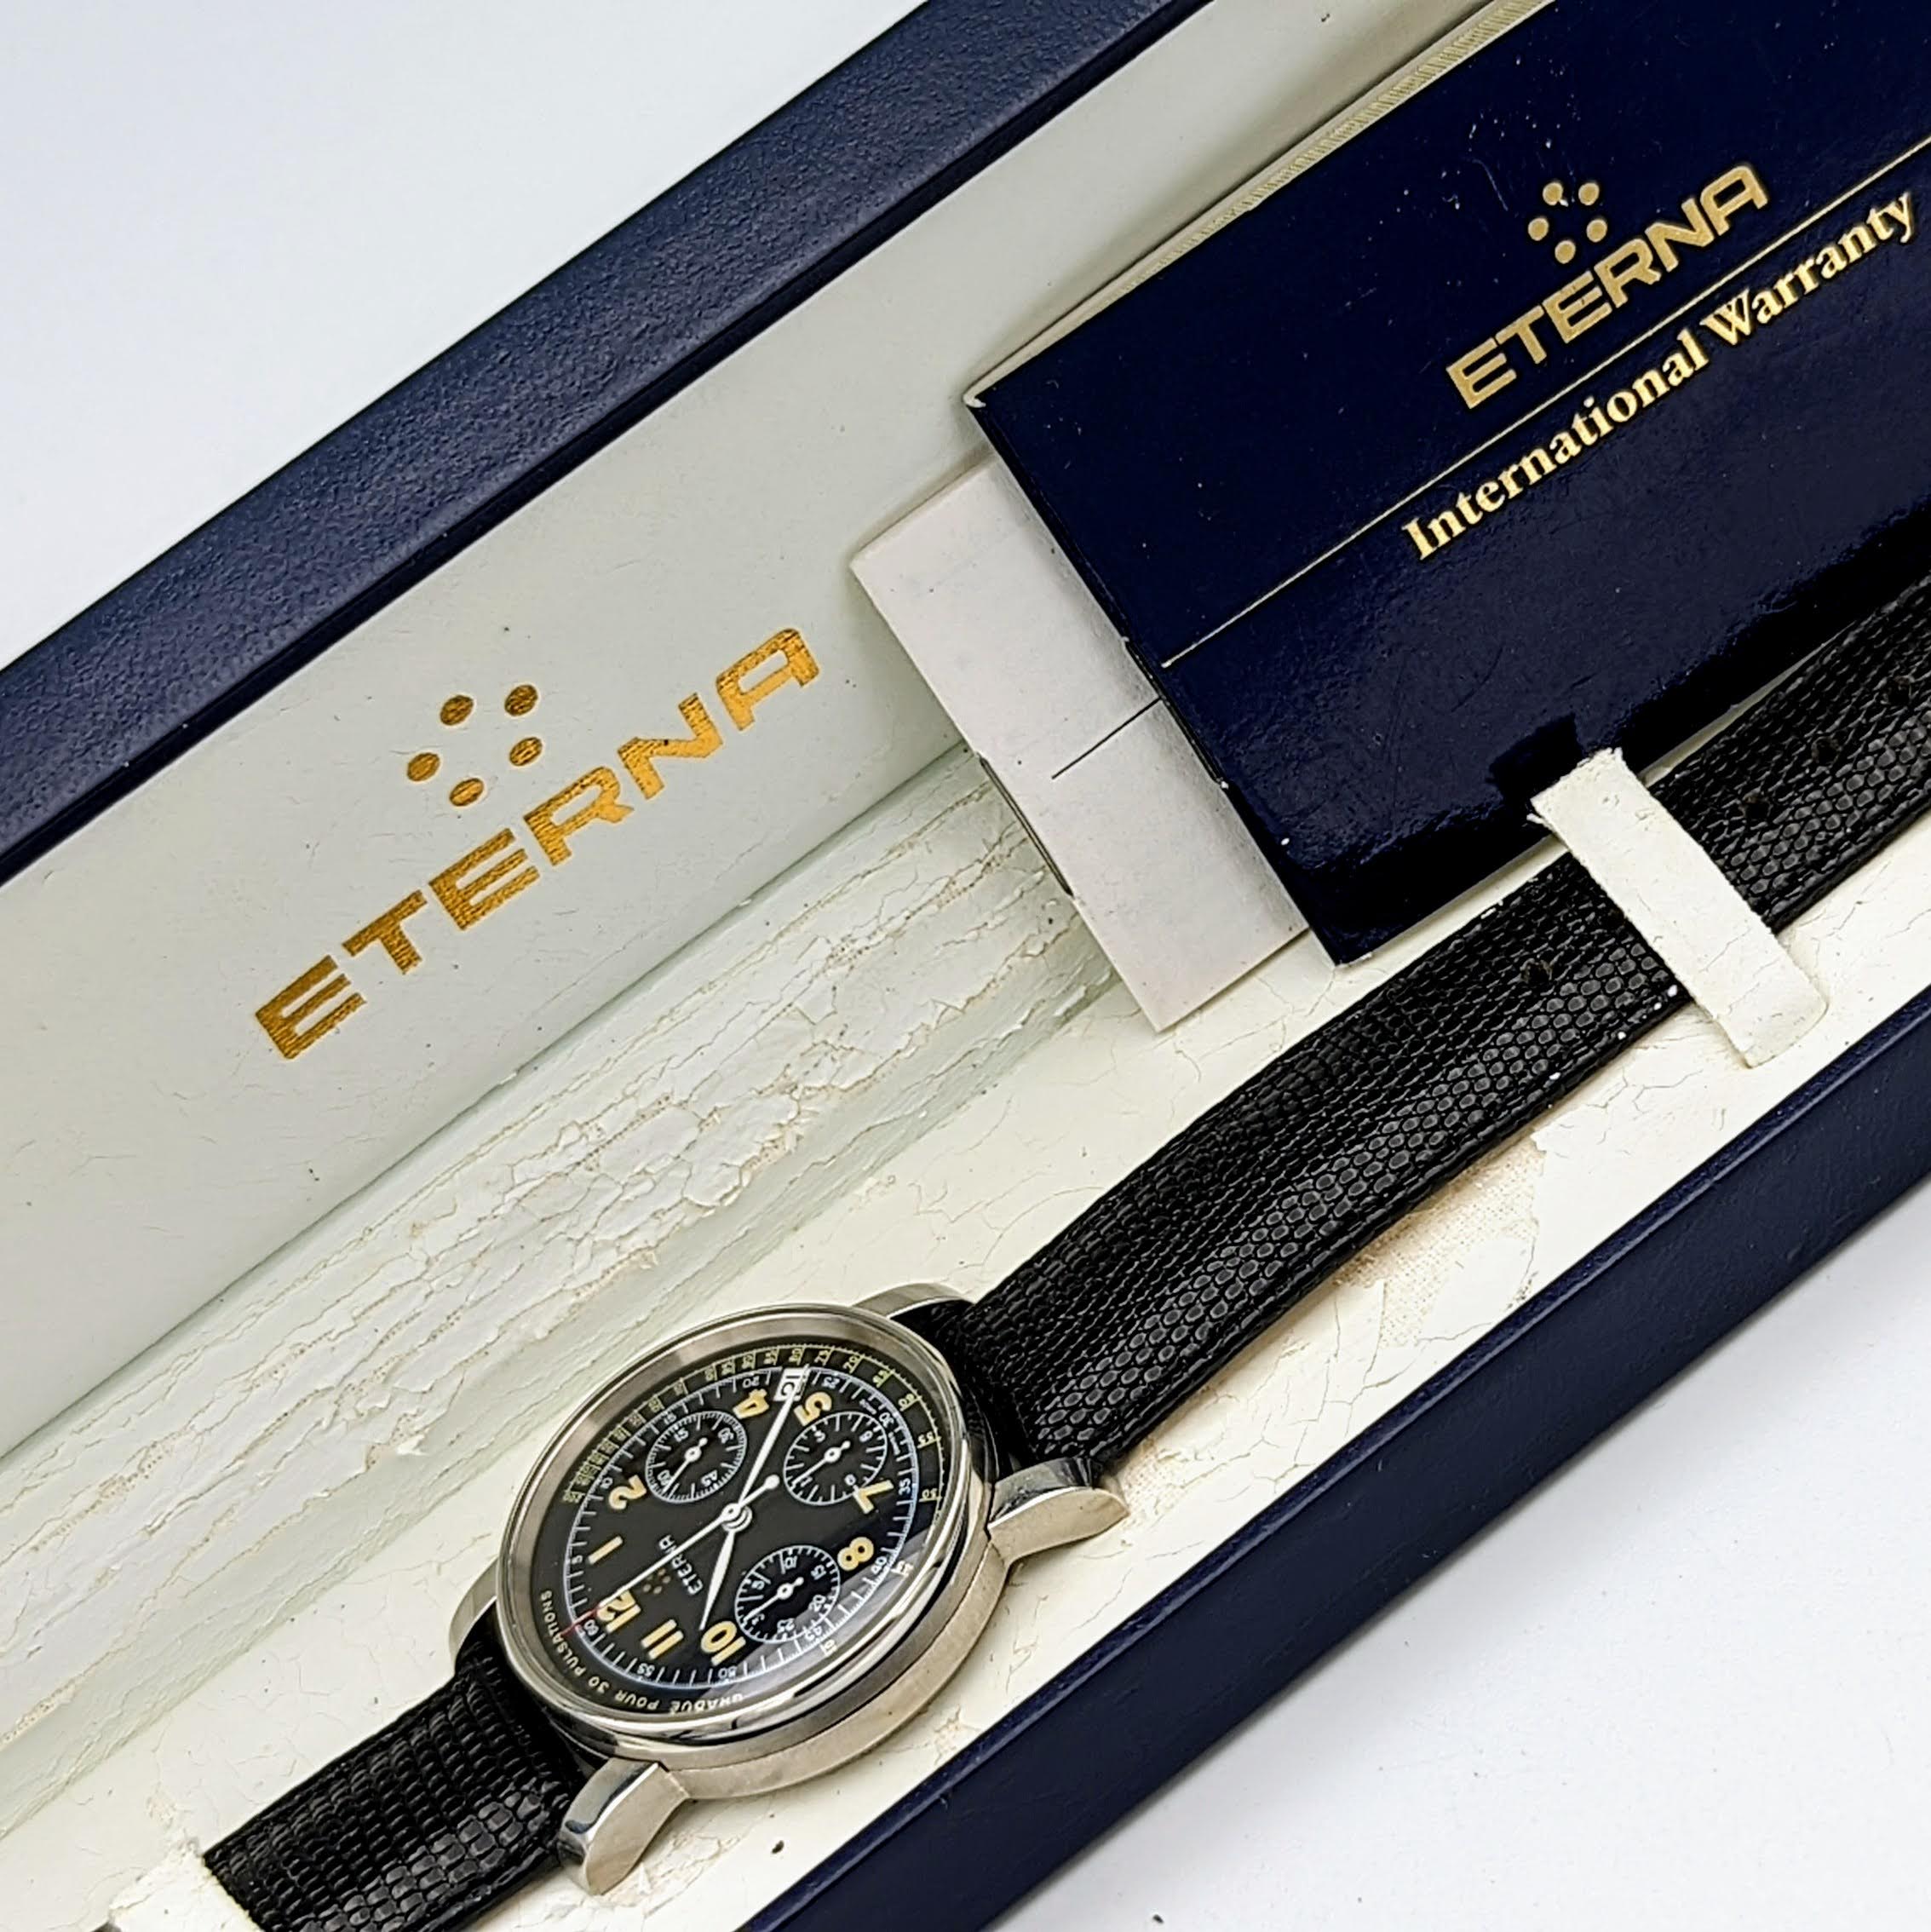 ETERNA Air Force Pulsometer Chronograph - Doctor's Watch - Special Edition No. 032